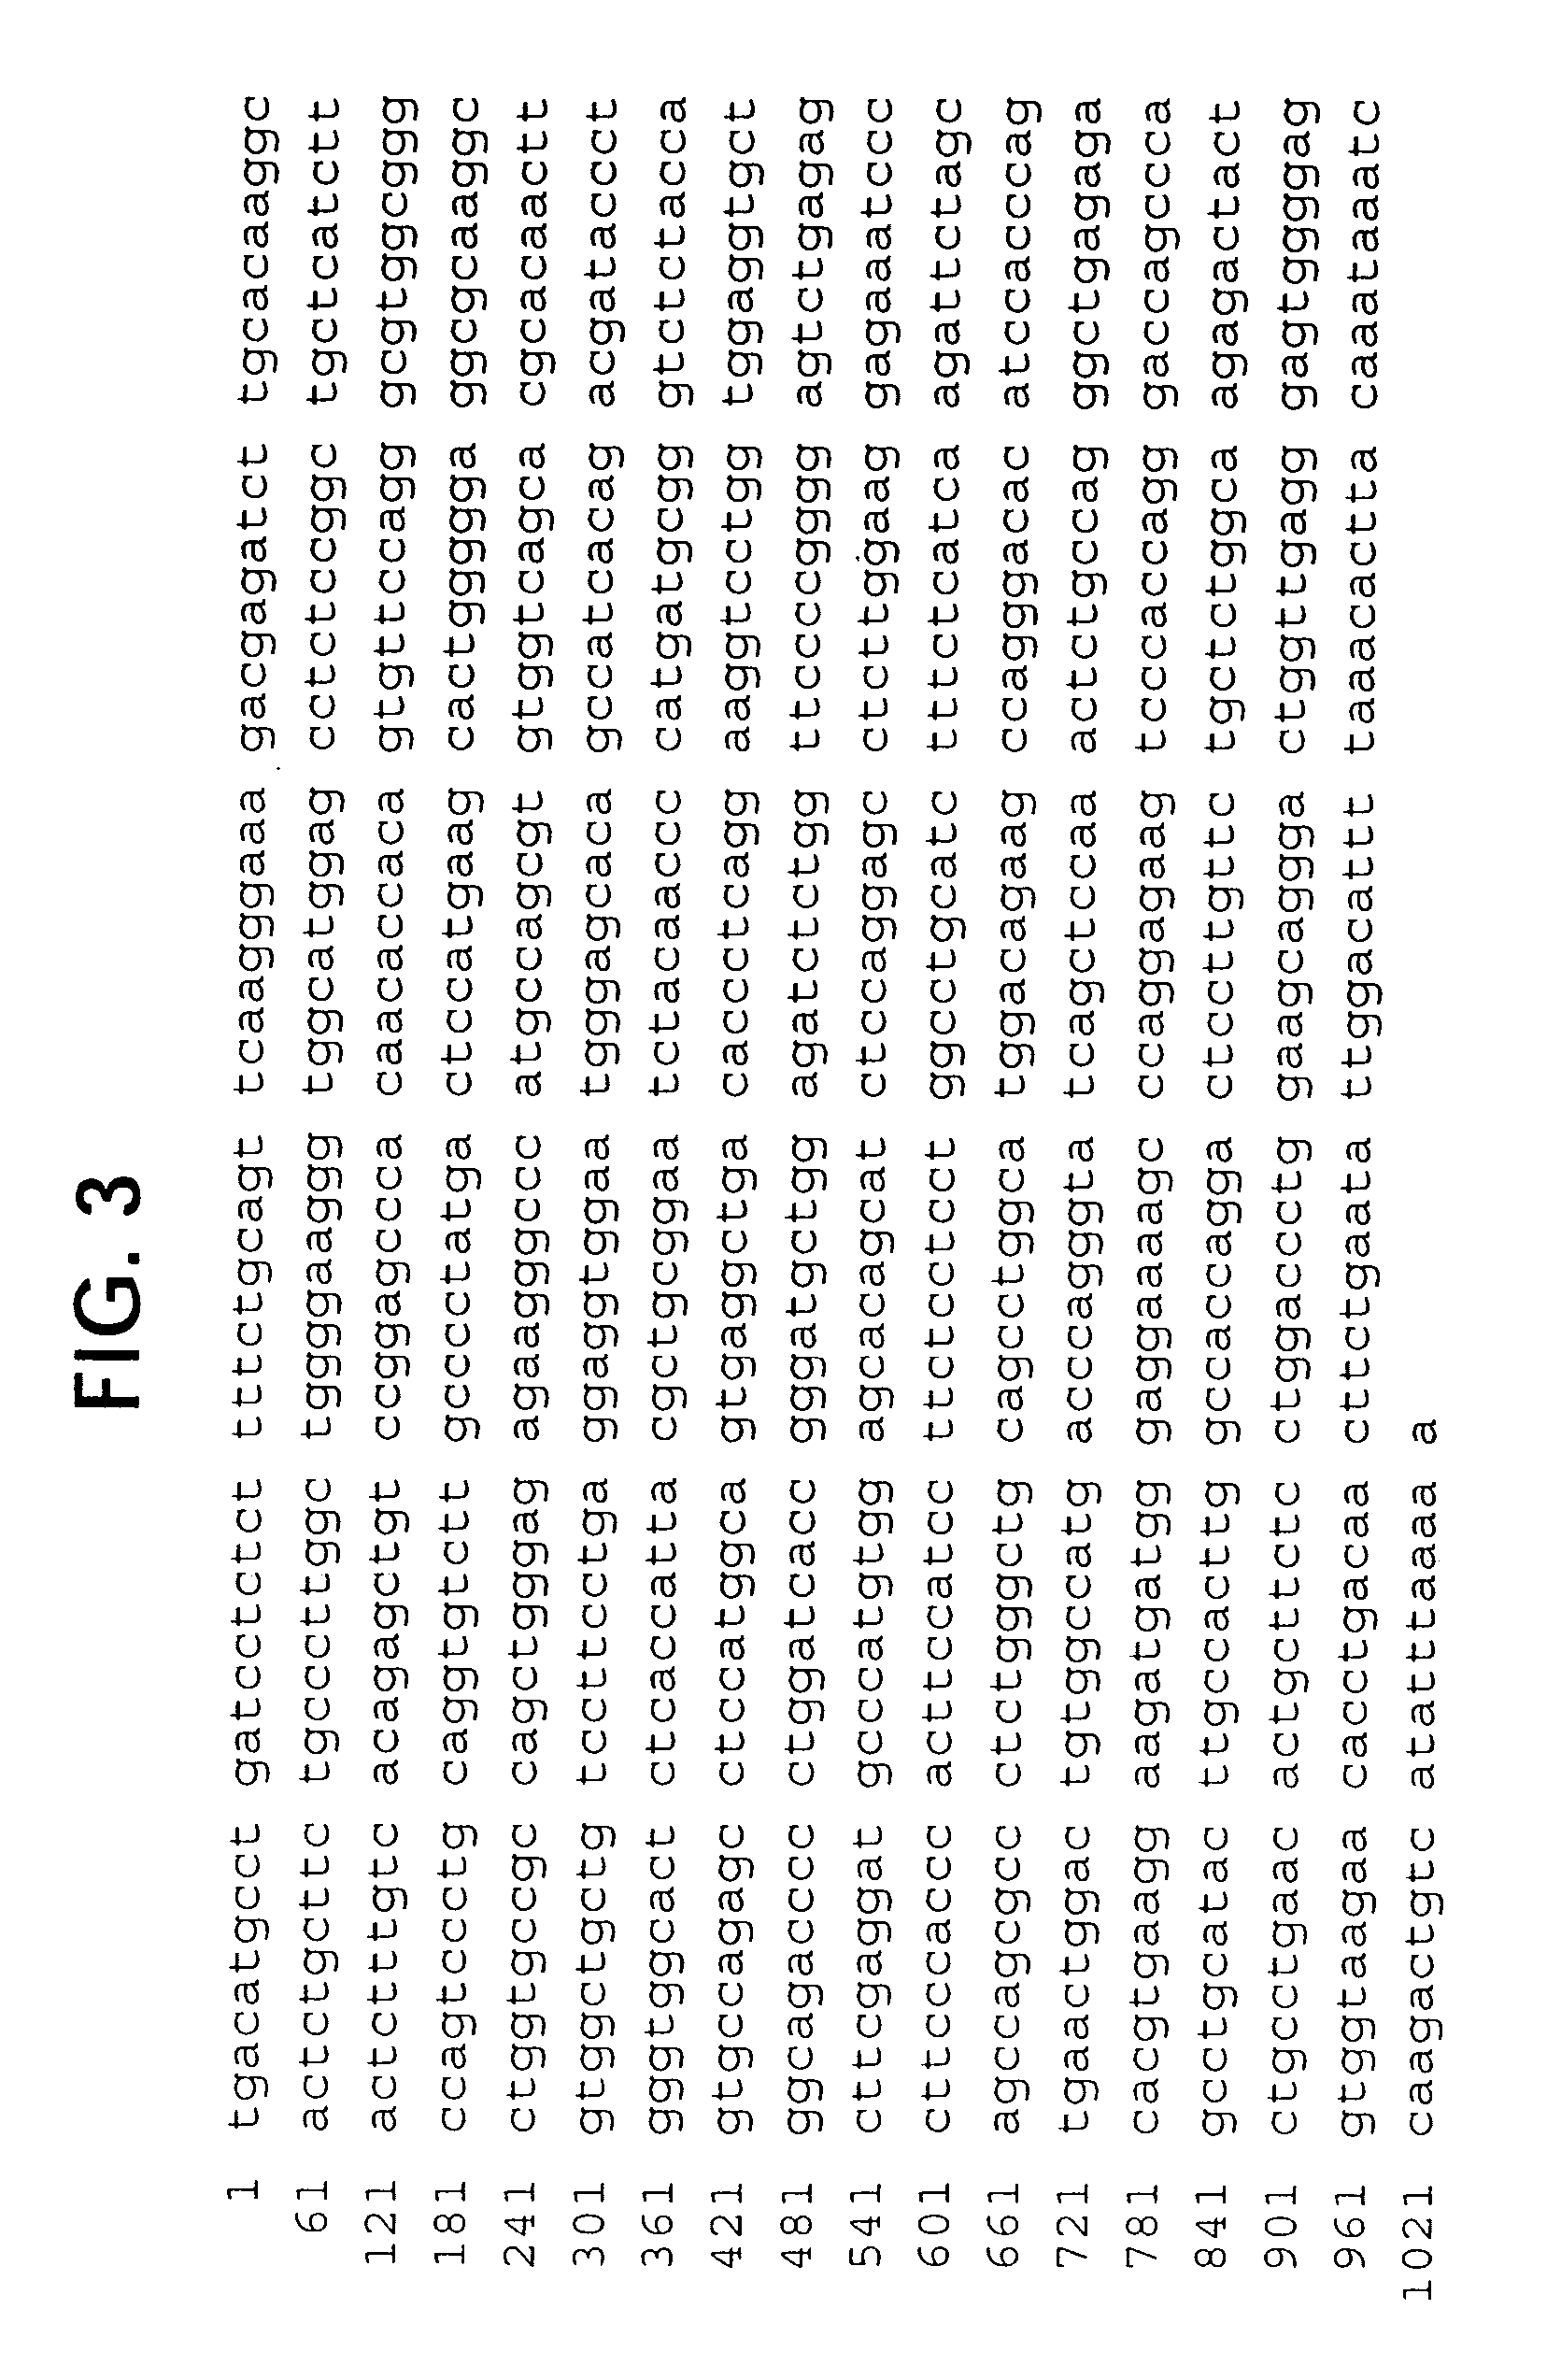 Novel receptor trem (triggering receptor expressed on myeloid cells) and uses thereof